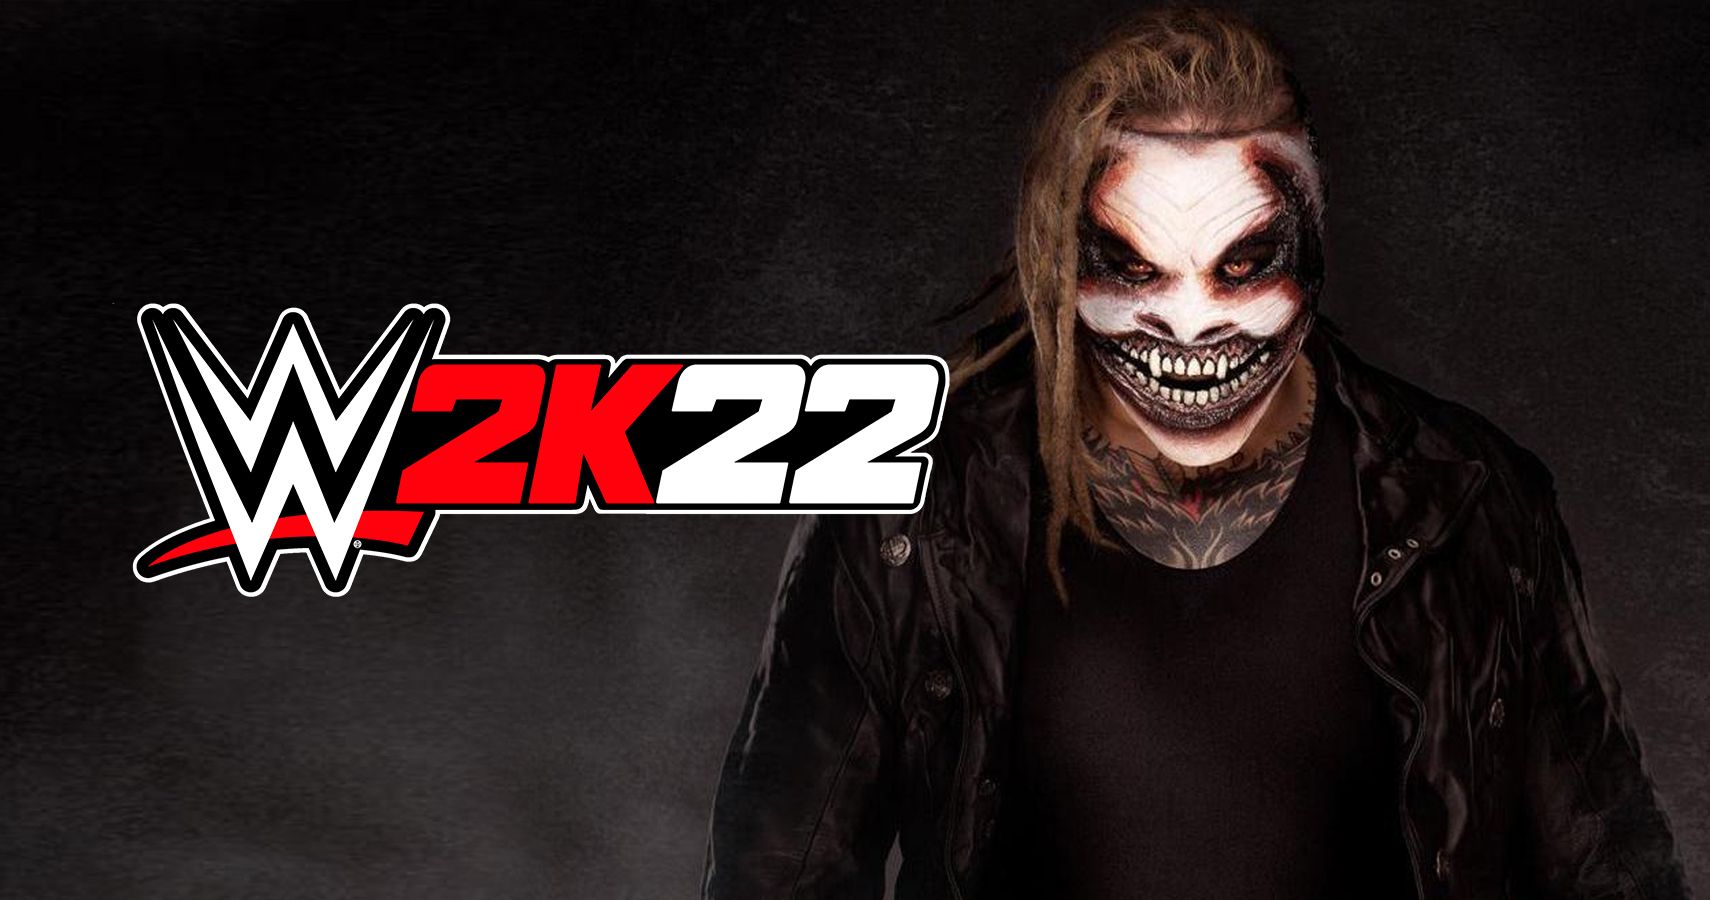 WWE-2K22-Cover-The-Fiend-Bray-Wyatt-Feature-Image